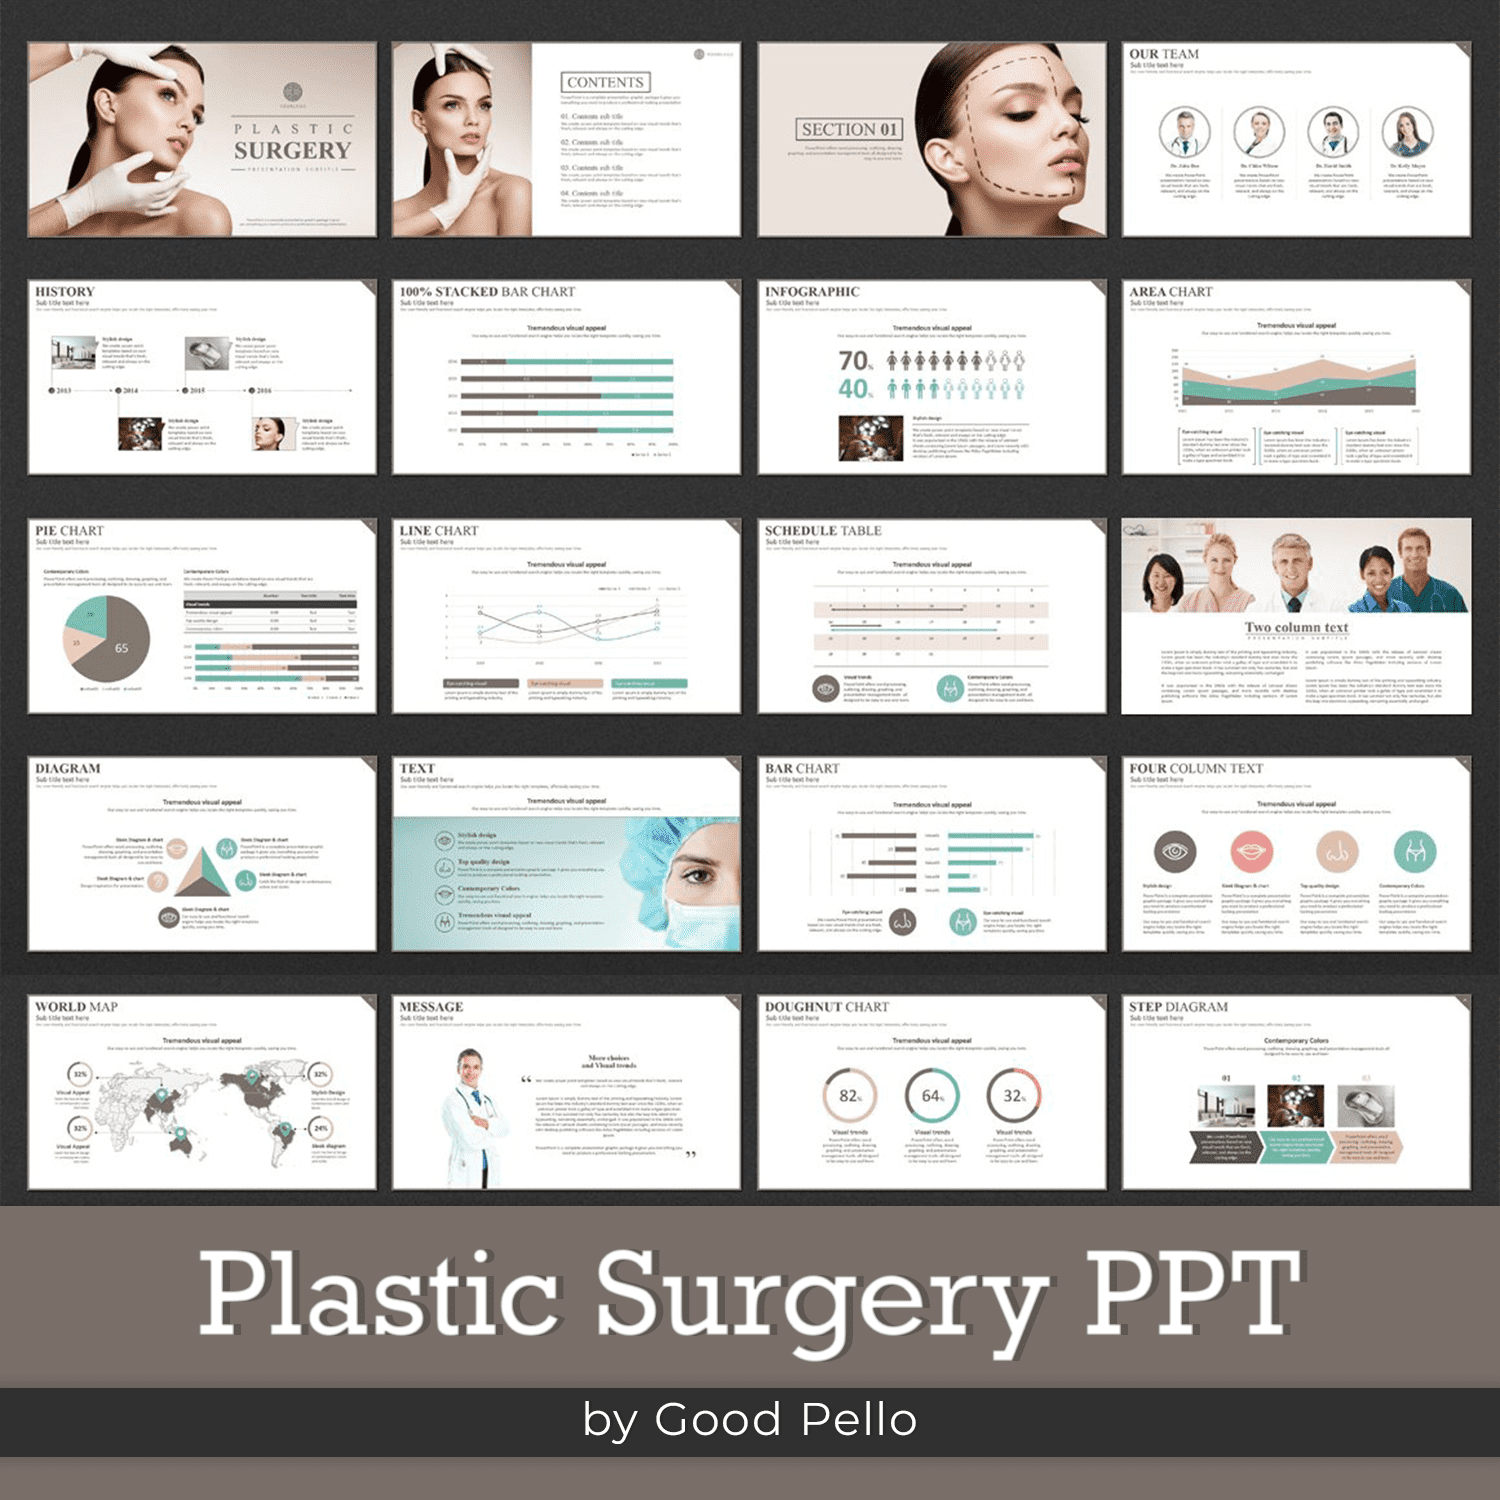 Plastic Surgery PPT cover.